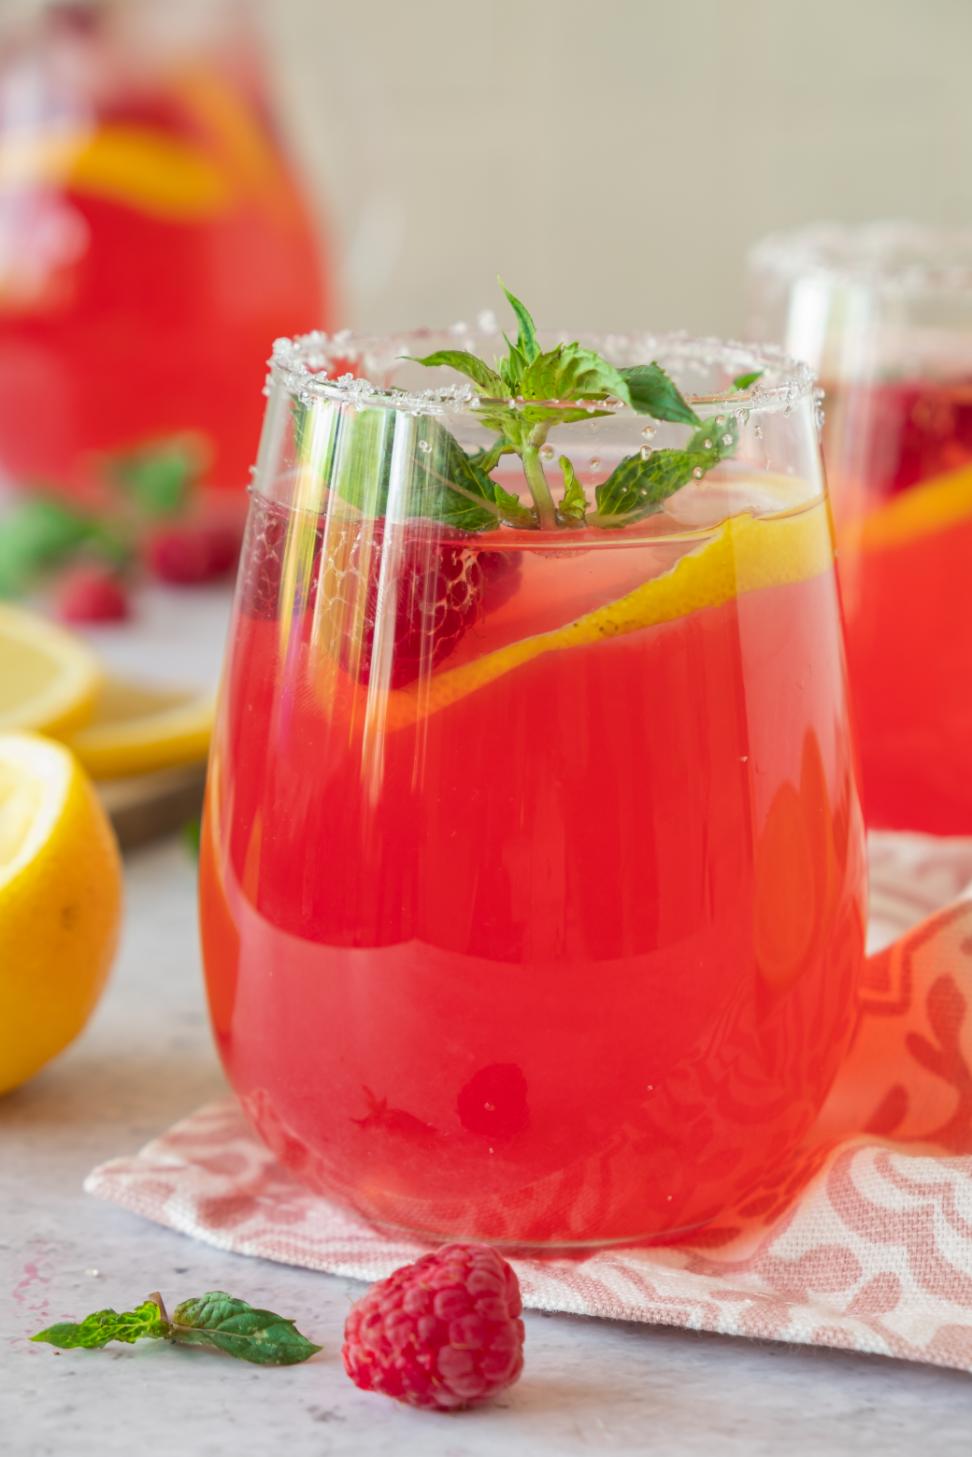 Homemade raspberry lemonade added to a glass with ice, lemon slices and fresh mint